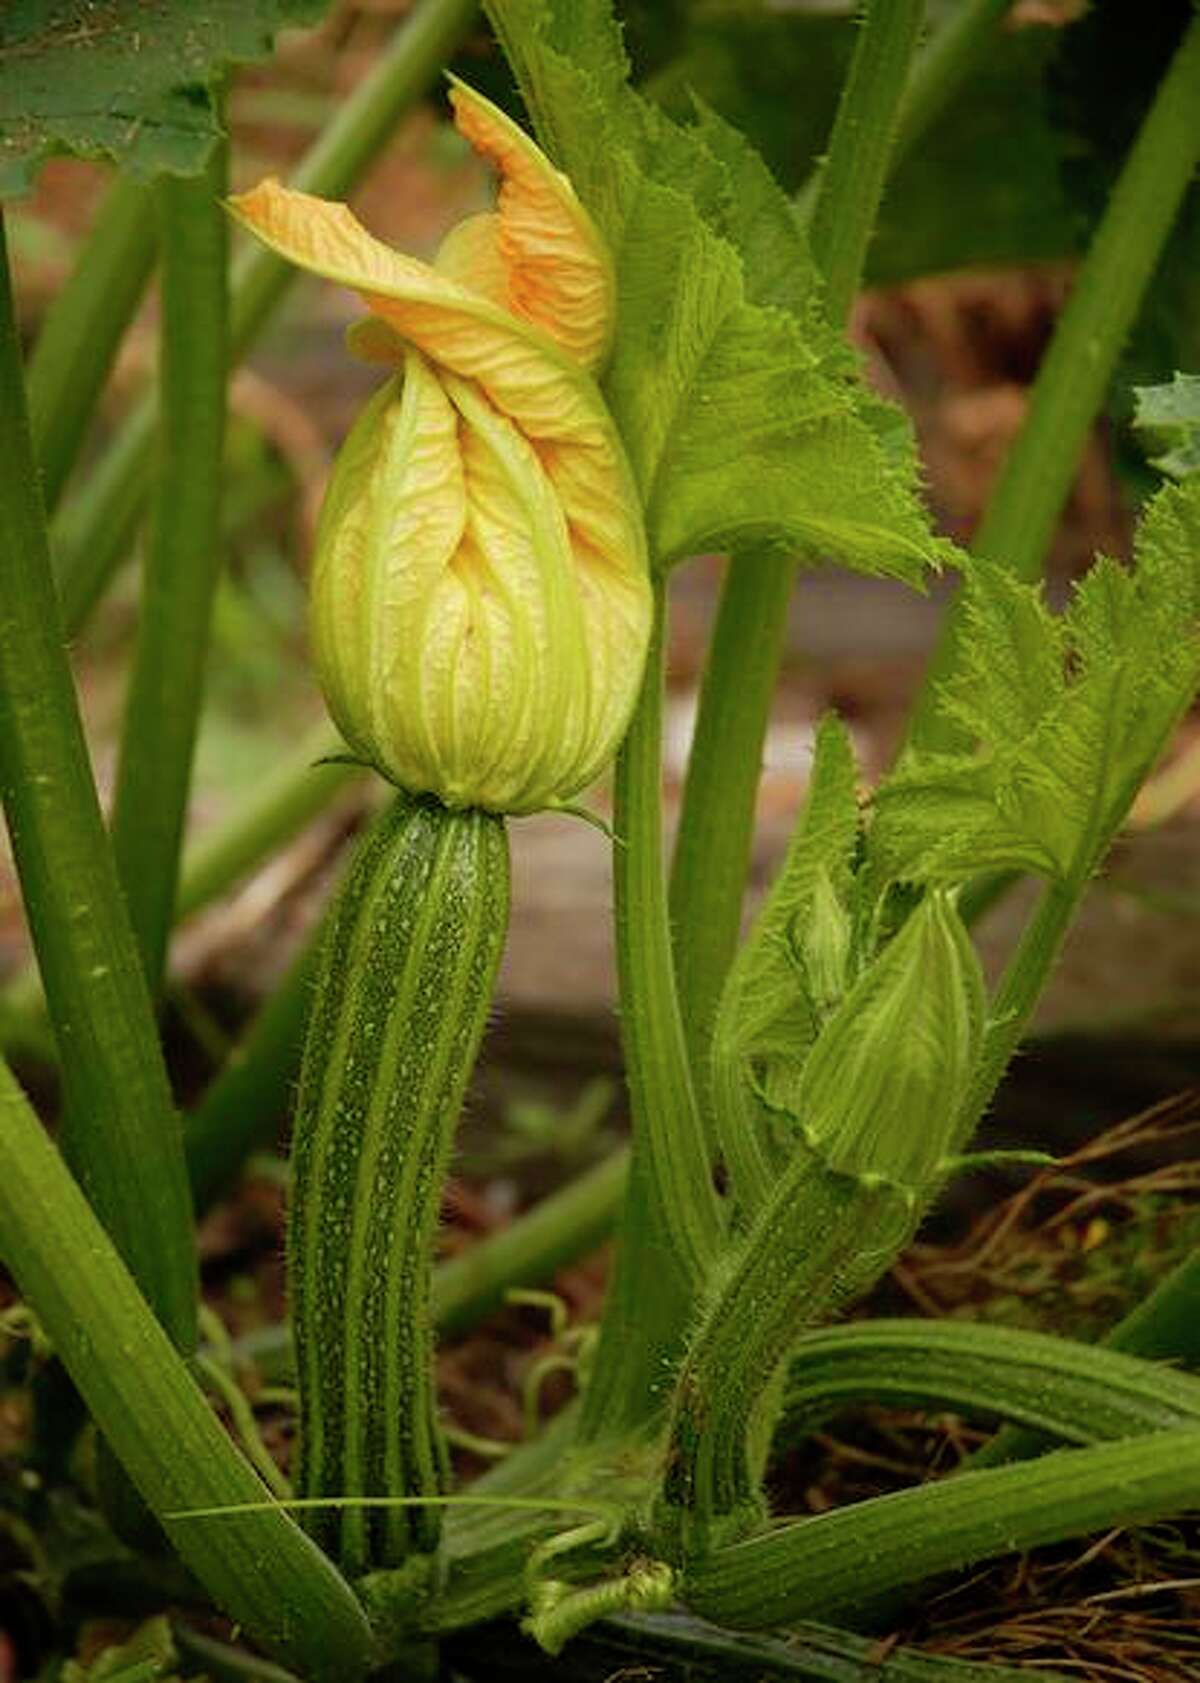 Female zucchini blossoms have tiny squash behind them. When you see one start to enlarge, the harvest will start in a day or two